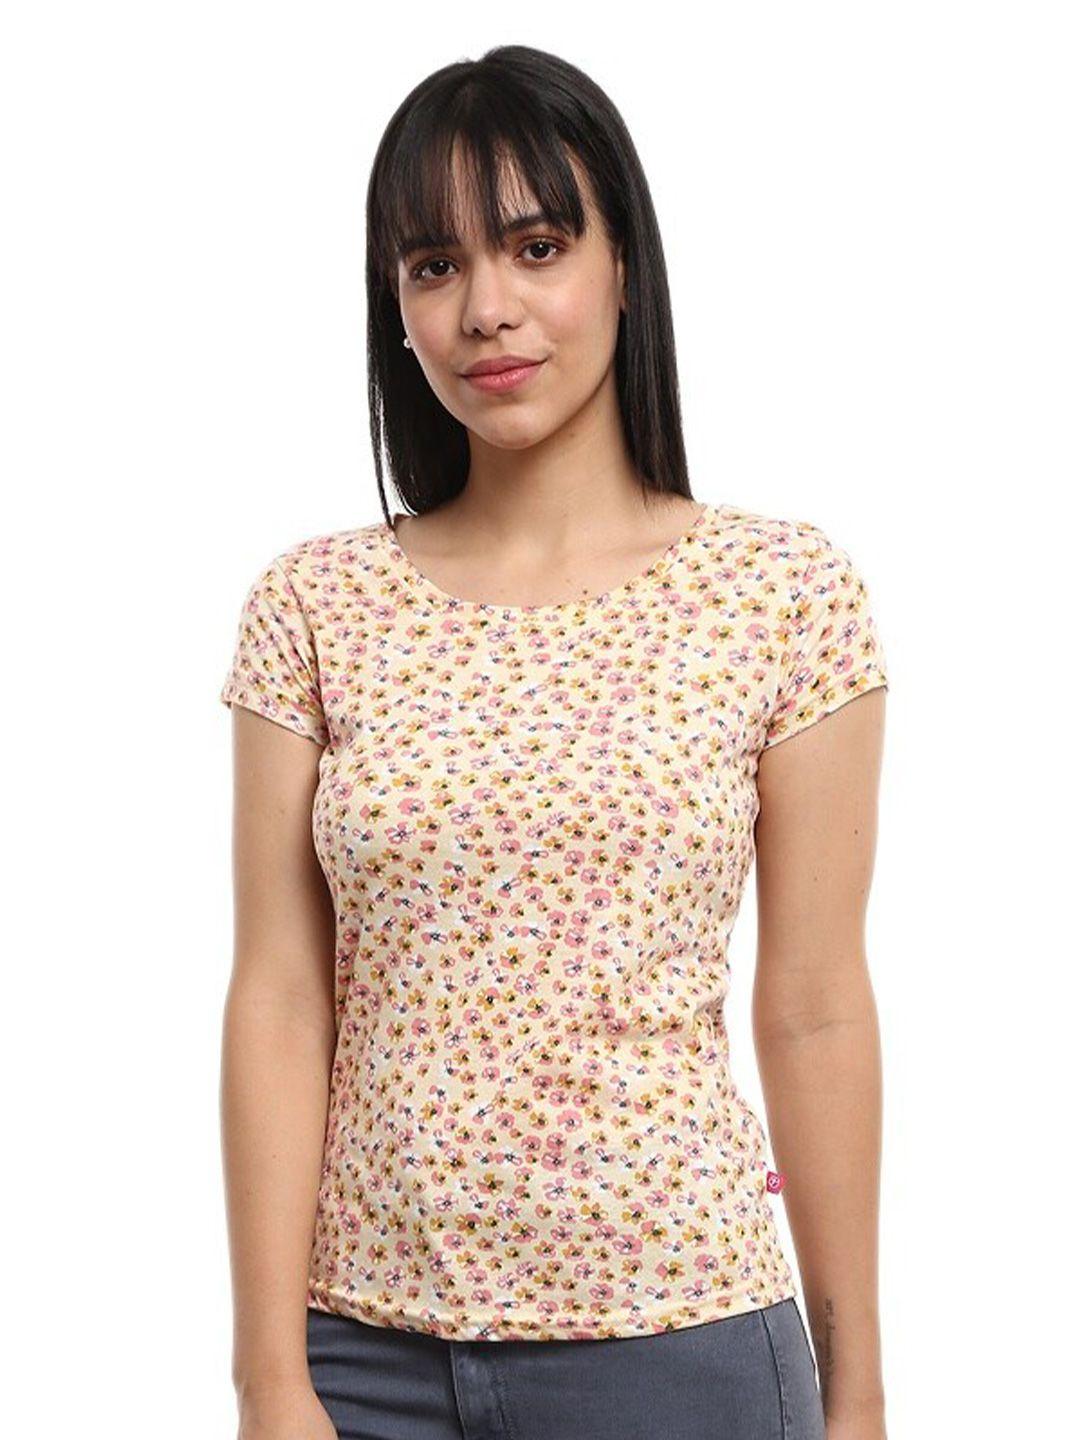 v-mart floral printed cotton casual t-shirt